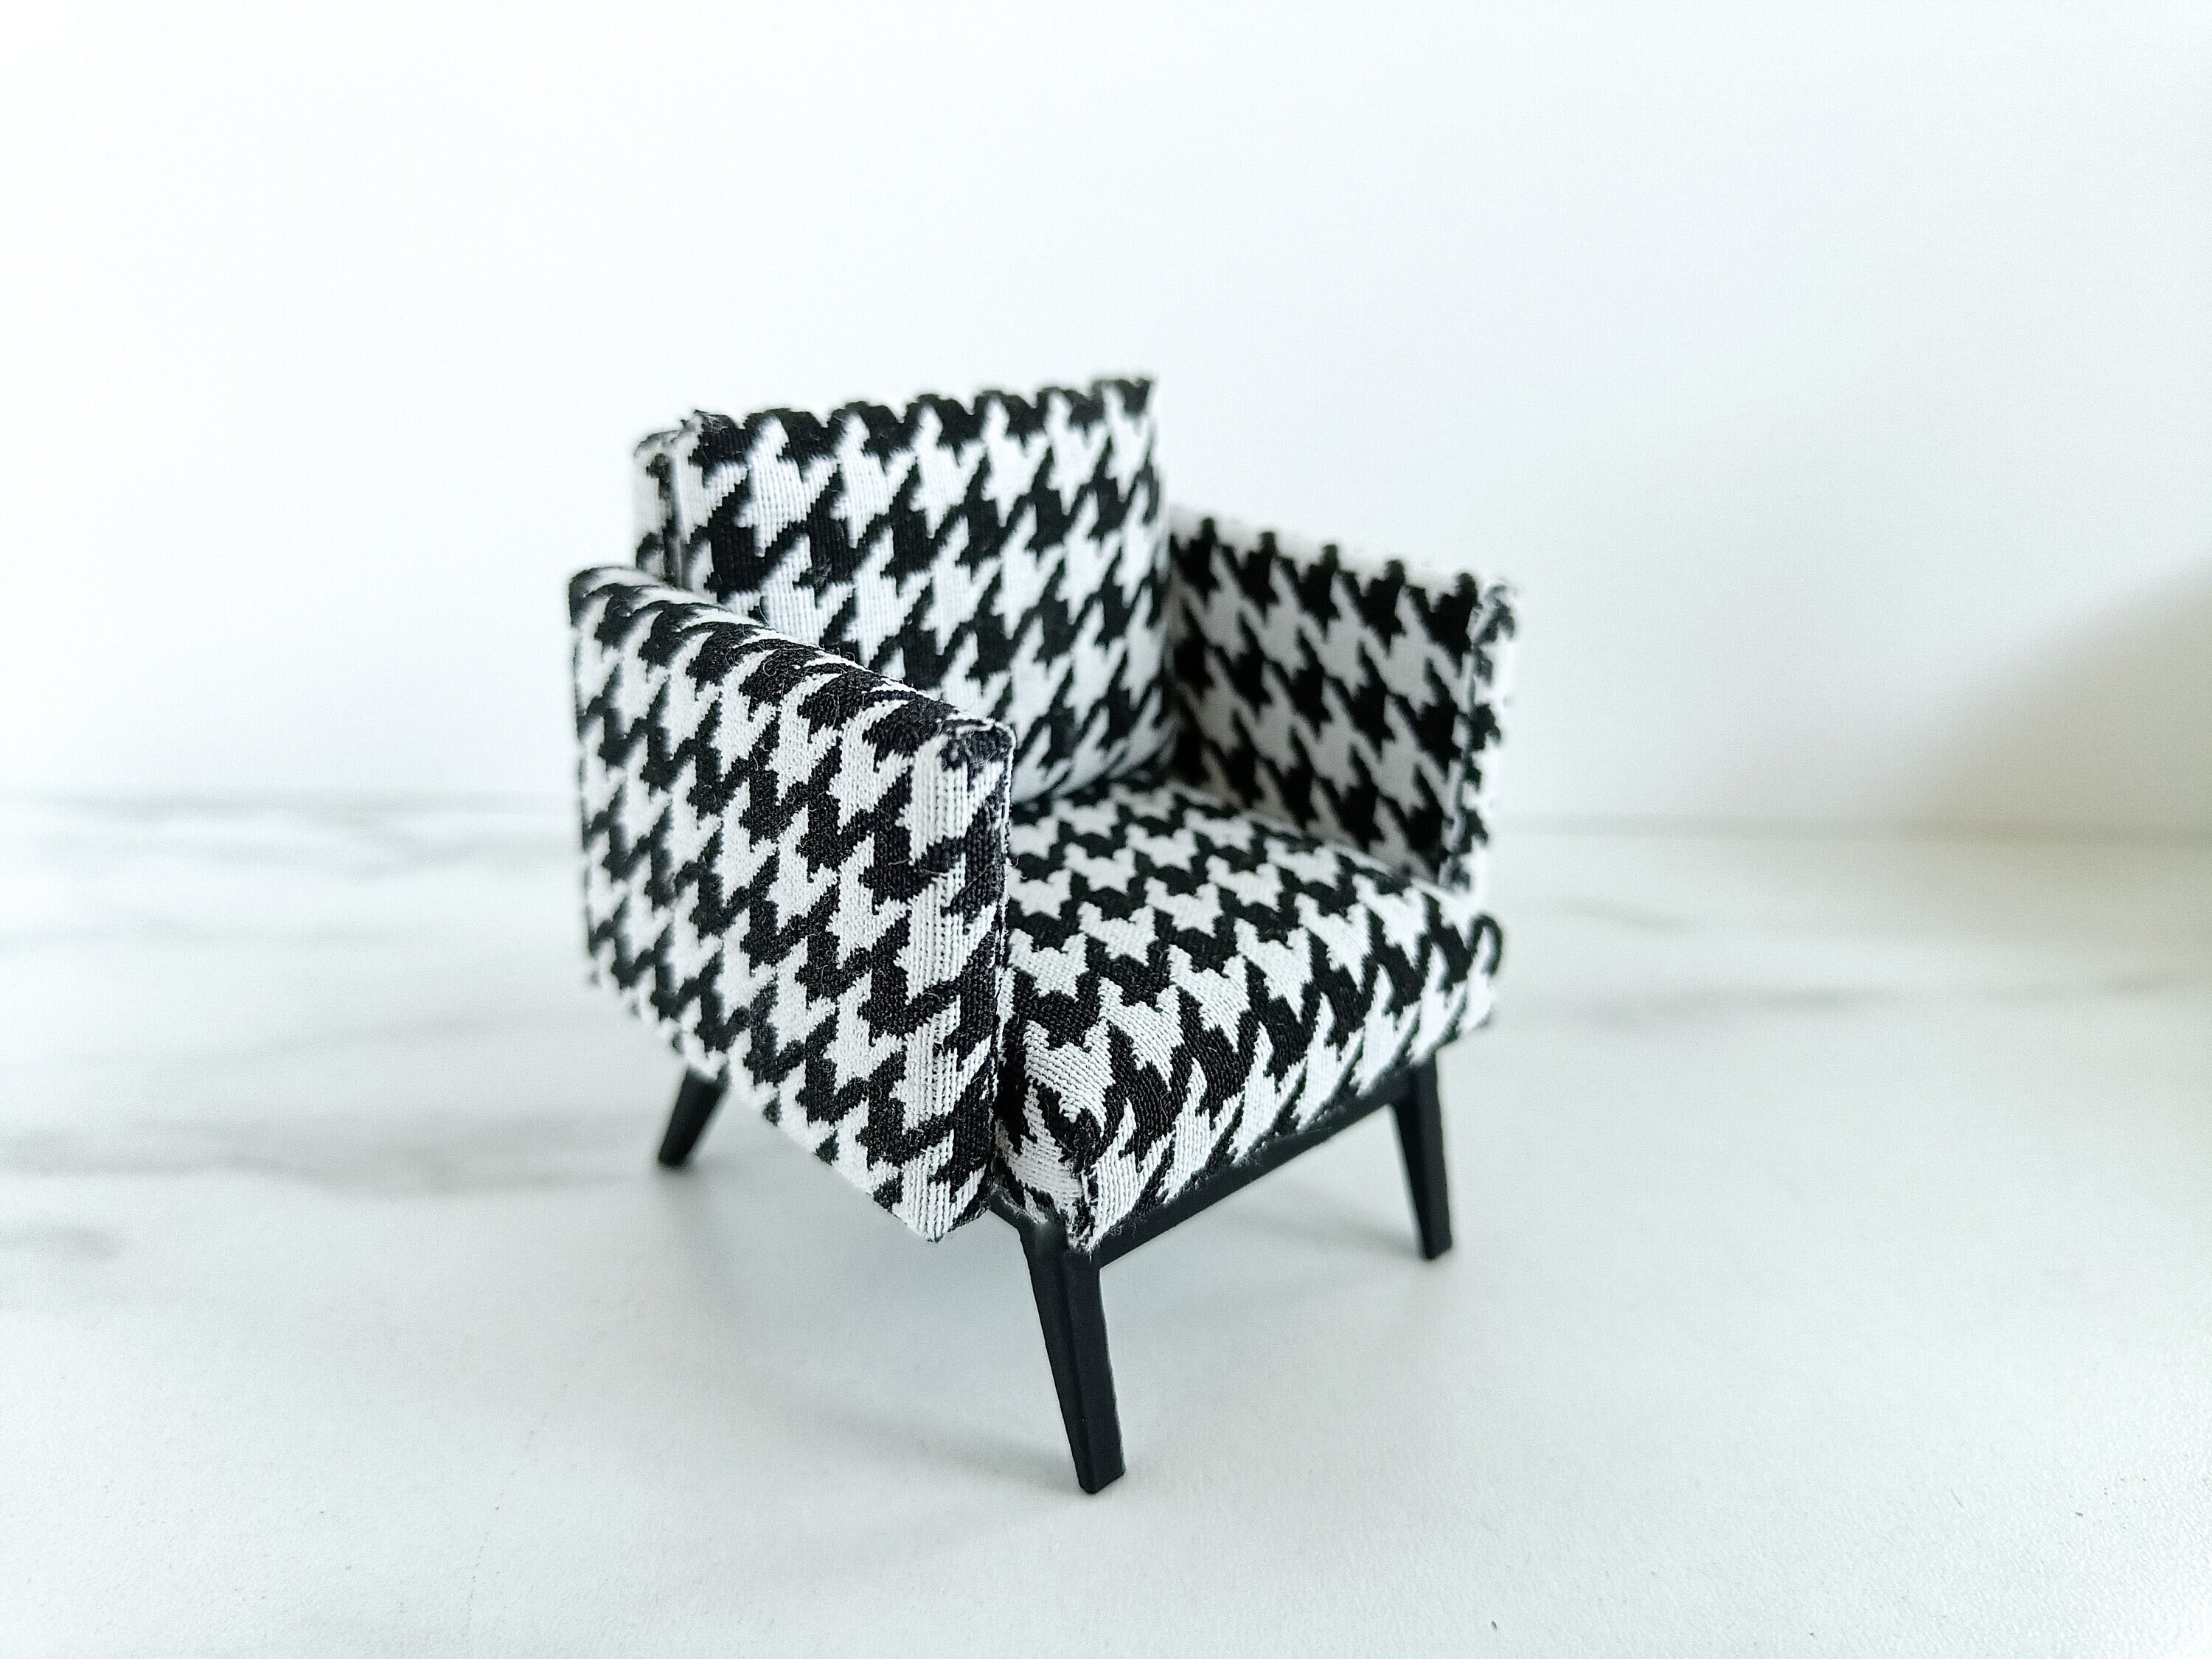 Black and White Houndstooth Fabric - 2.5 Big Size Black Houndstooth Print  Fabric for Home Decor, Chair Upholstery Fabric by The Yard